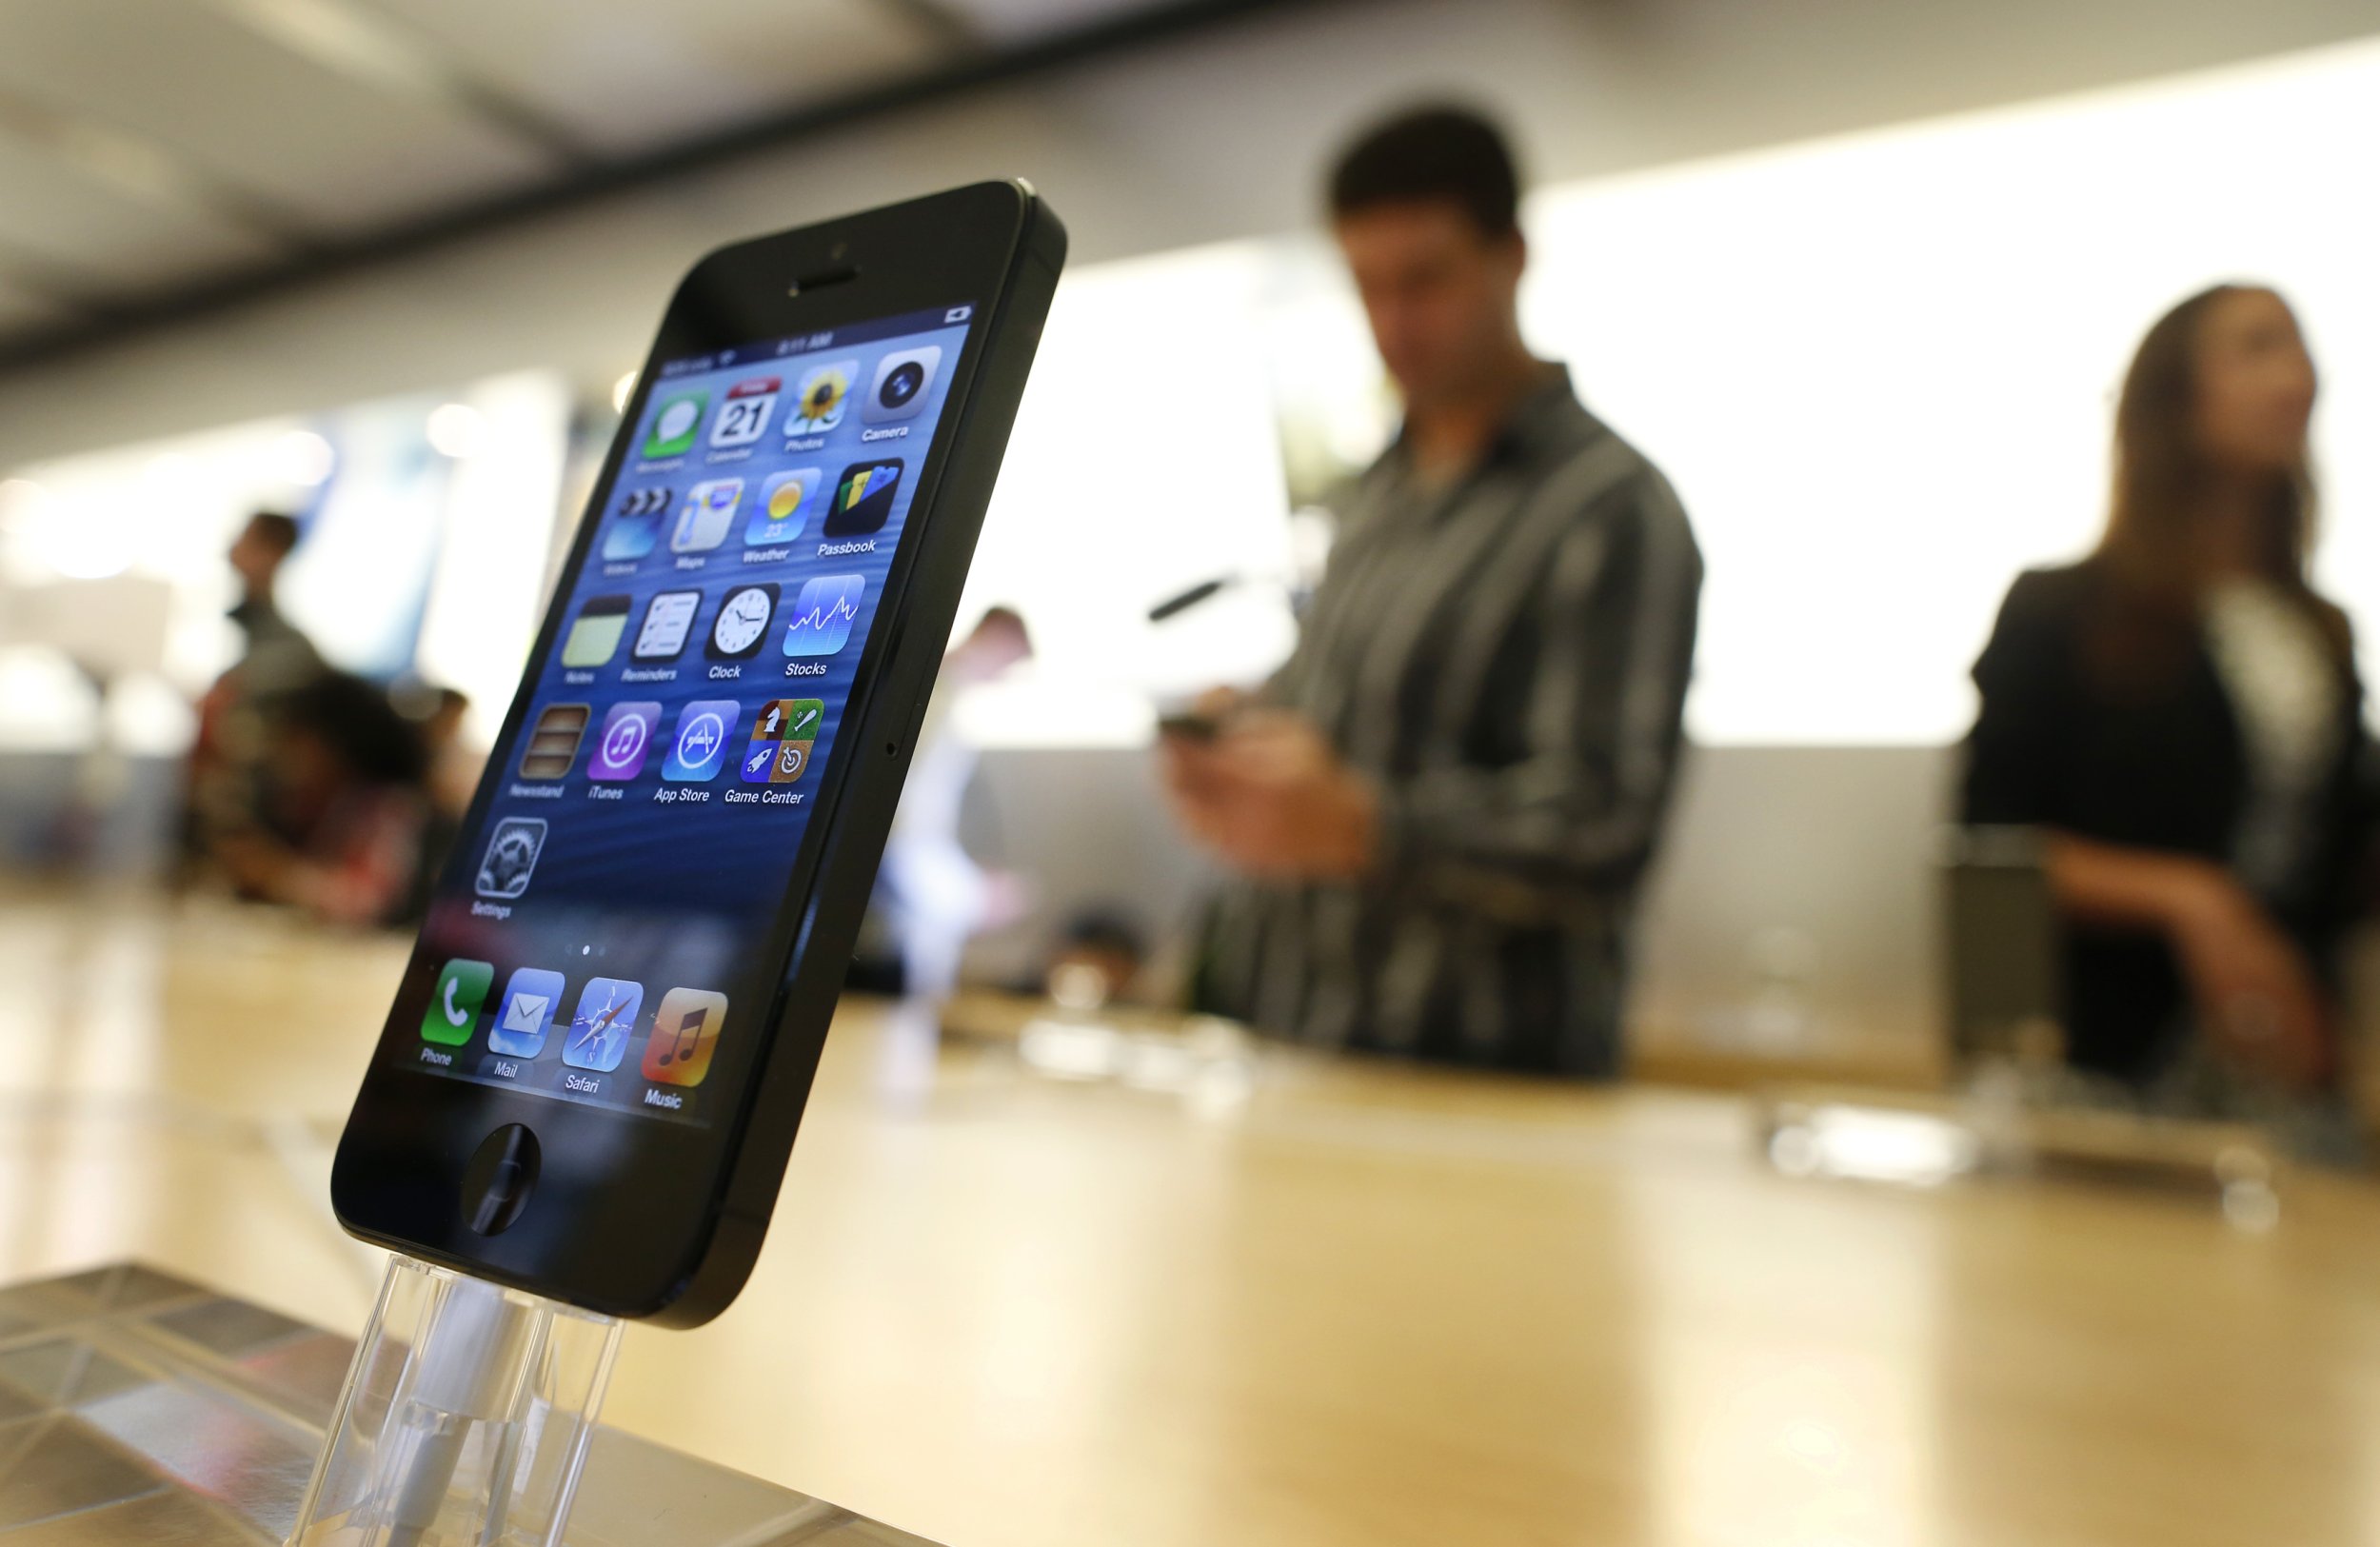 Apple Iphone 6 Release Date Rumors Analyst Says Iphone 5s Sequel Will Launch In June 2014 With